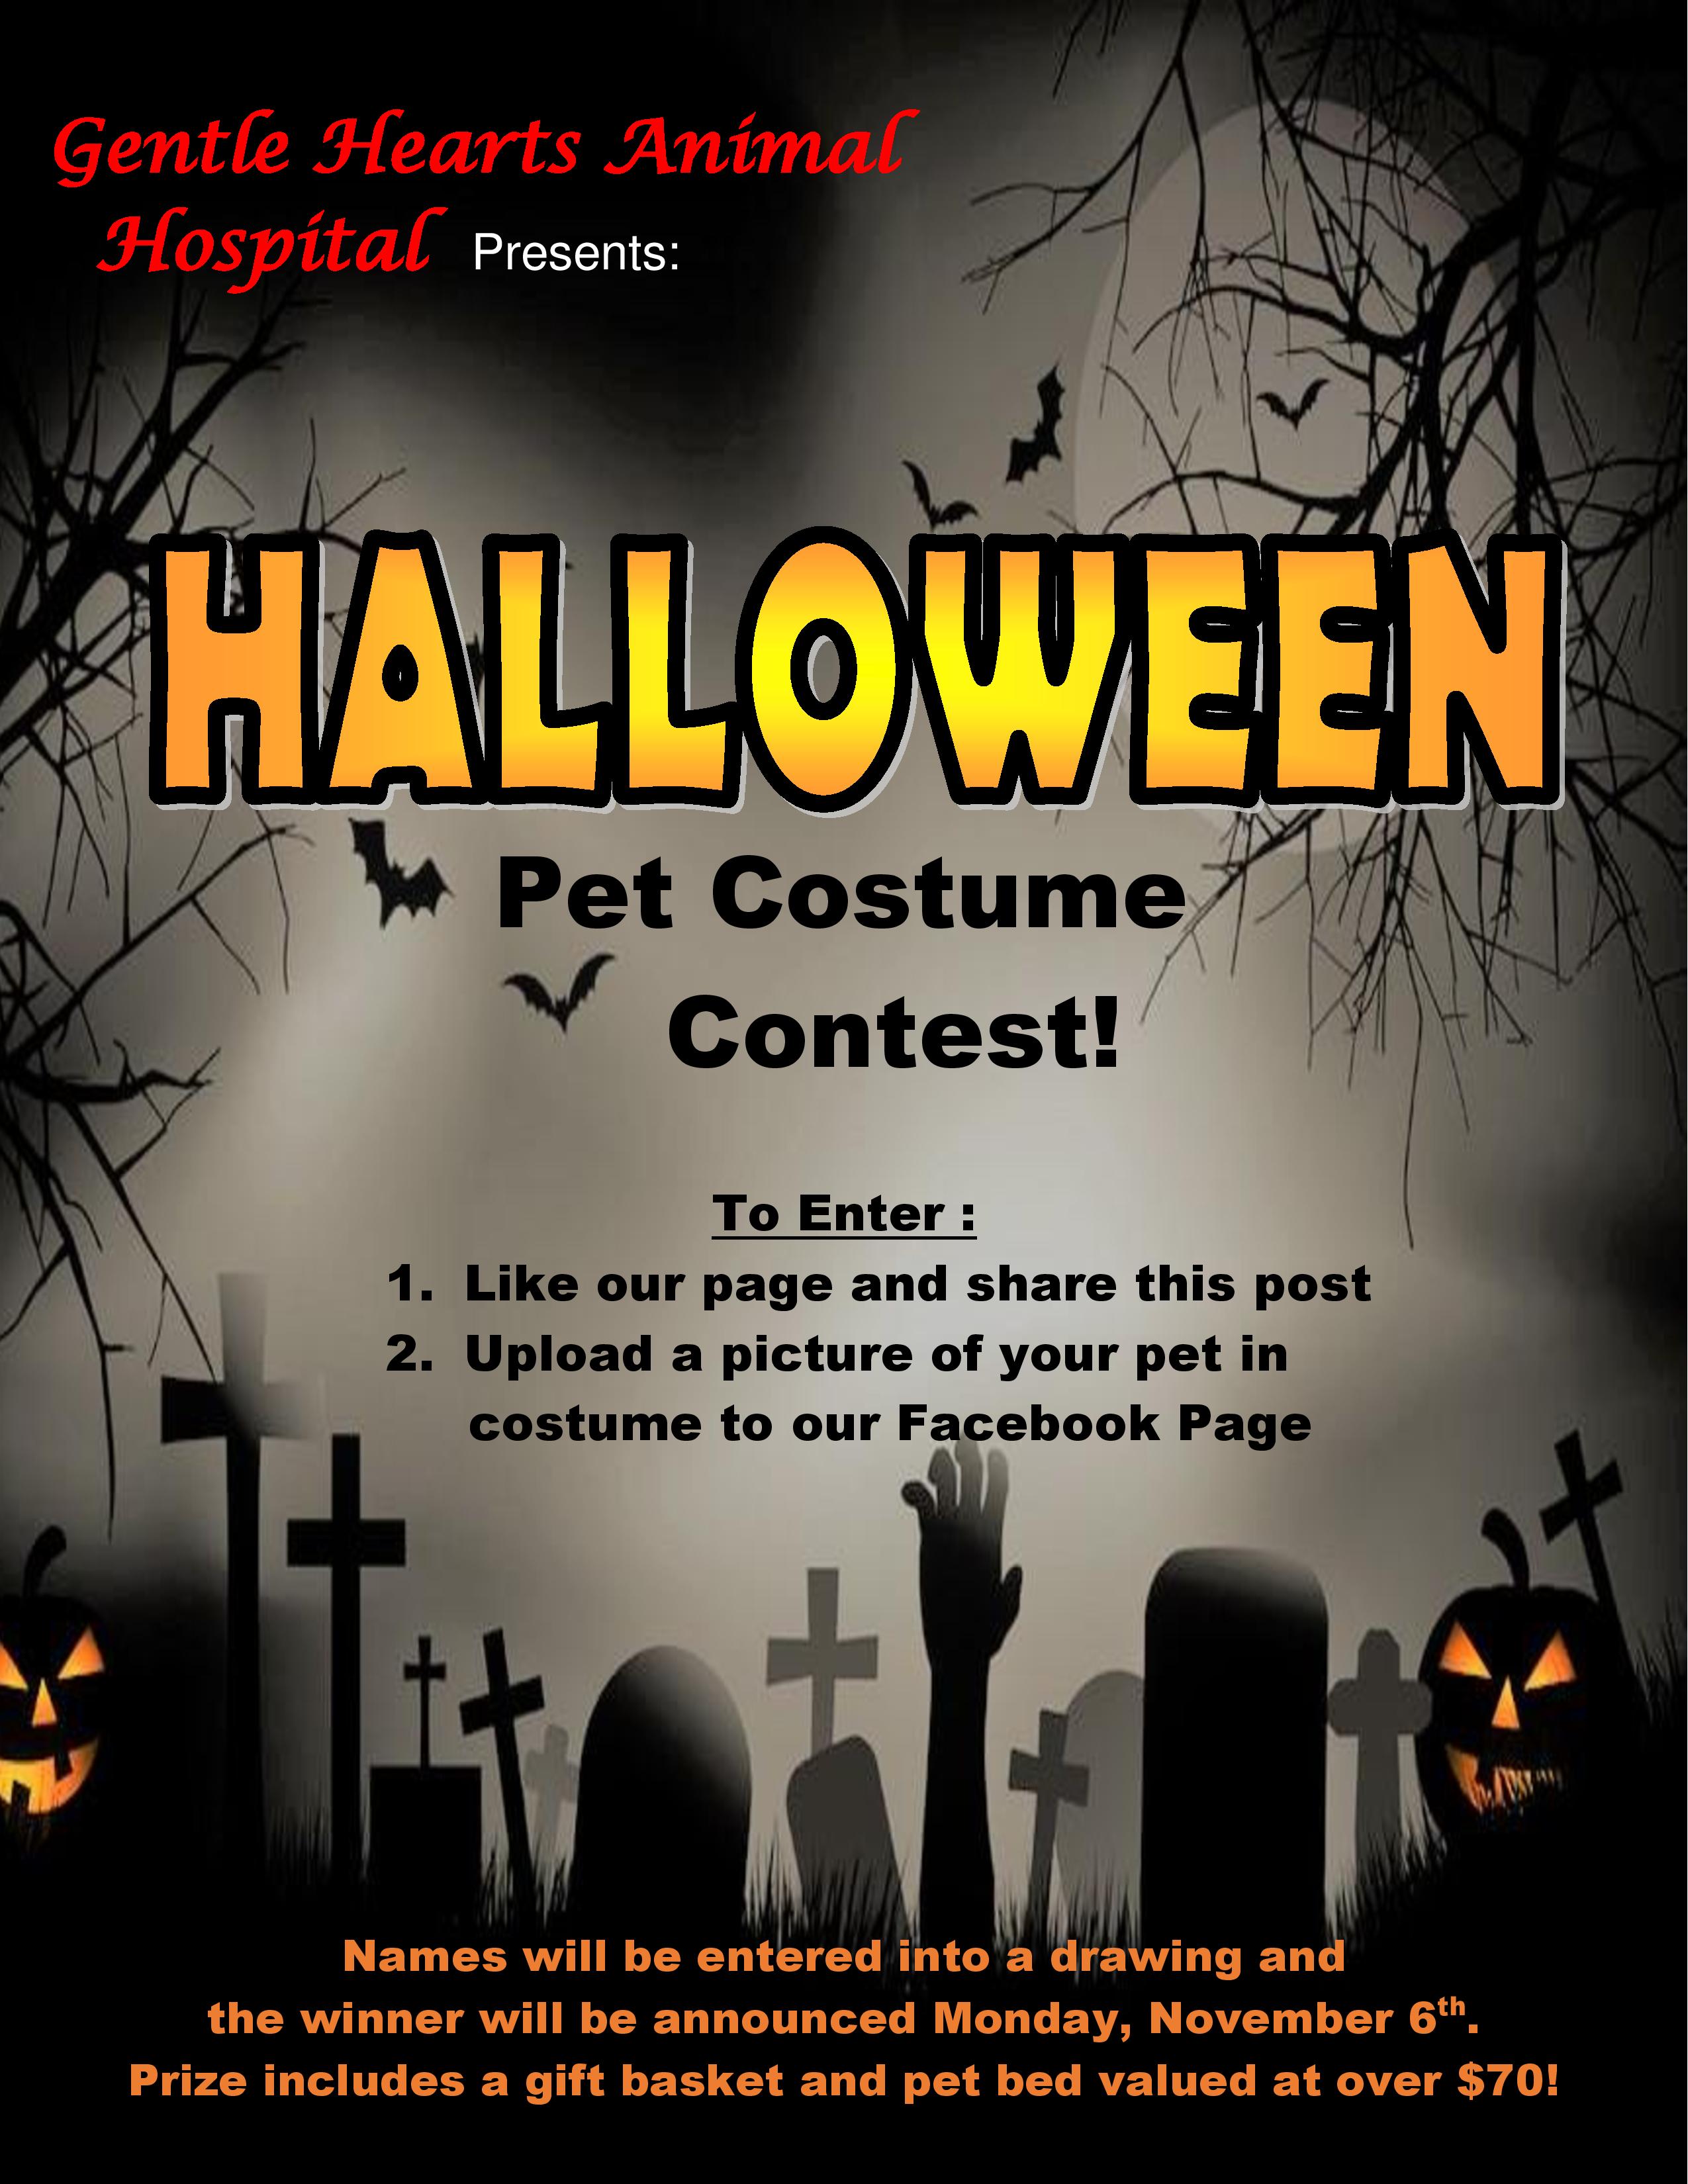 Halloween contest for pets!